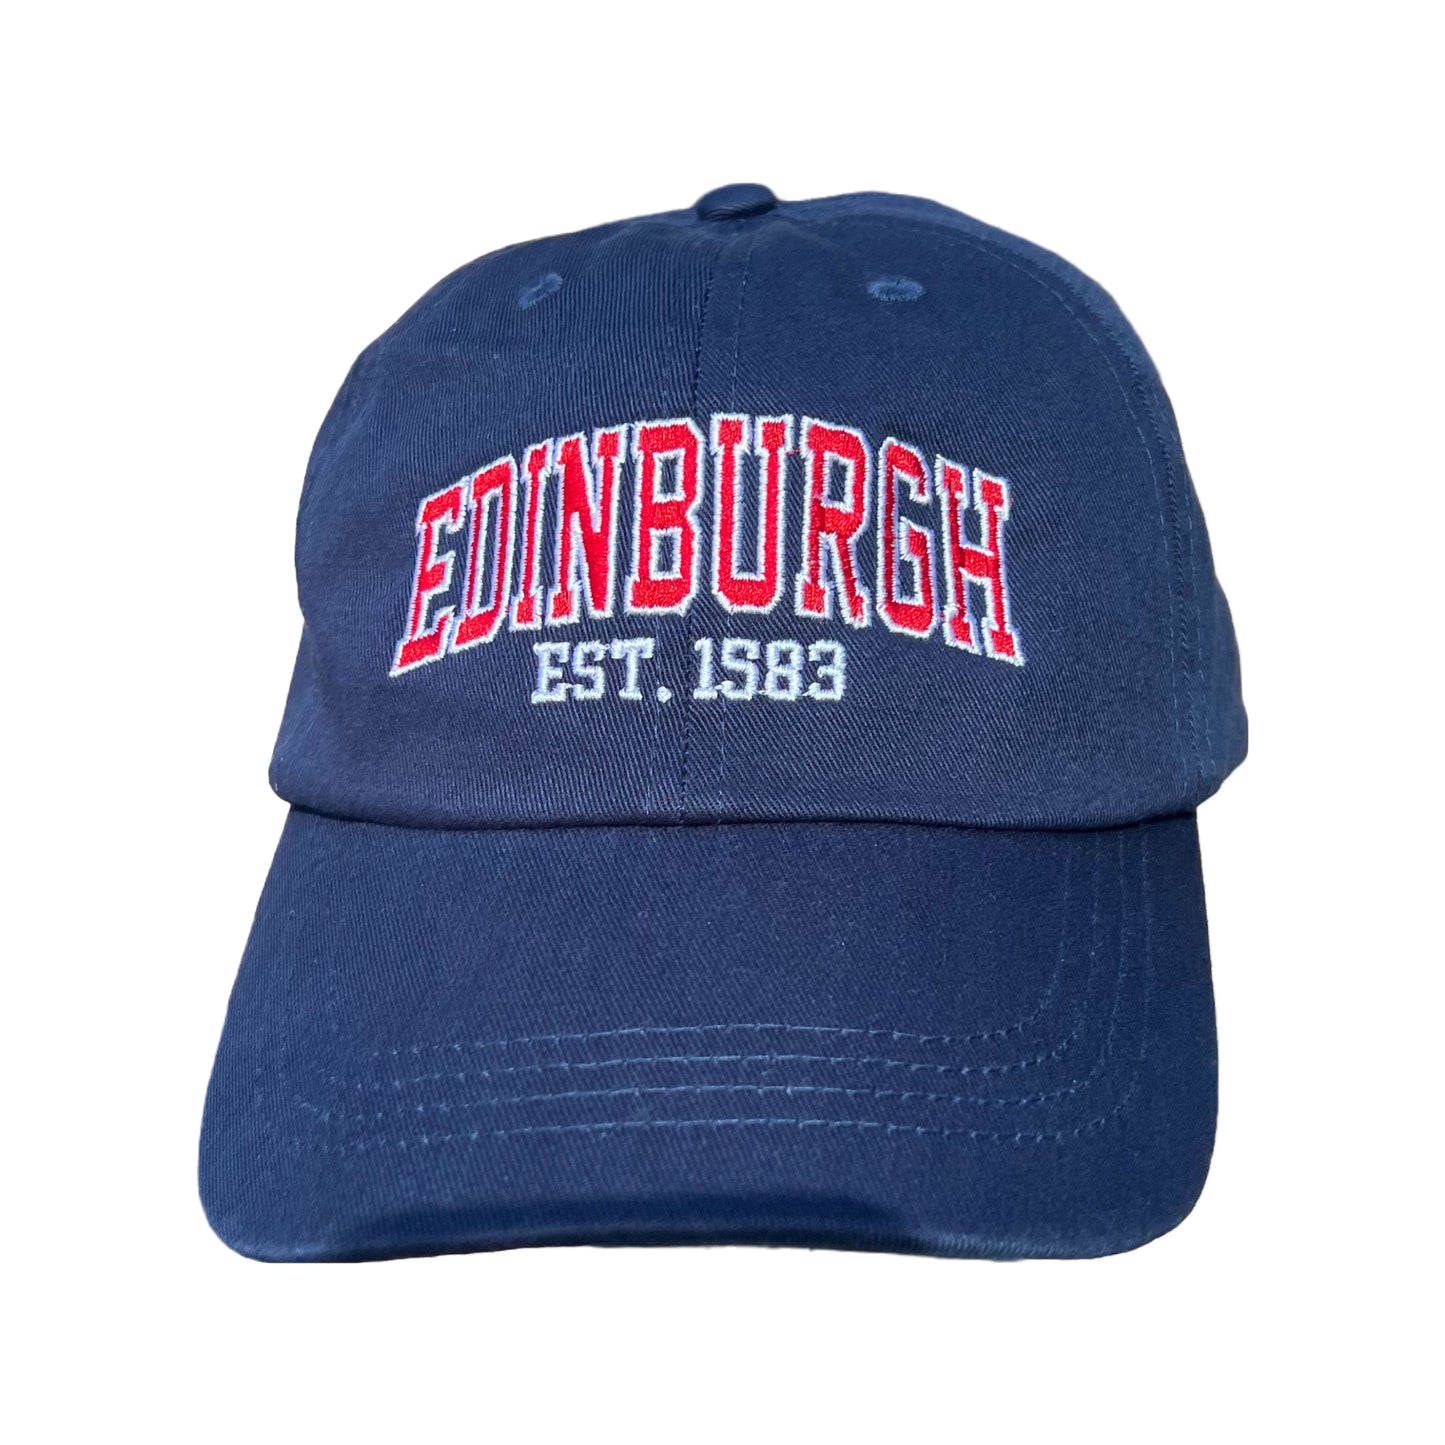 Front view of Navy Baseball cap with red and white embriodered text stating 'EDINBURGH'.  Smaller white embriodered text stating 'EST 1583' is beneath this.